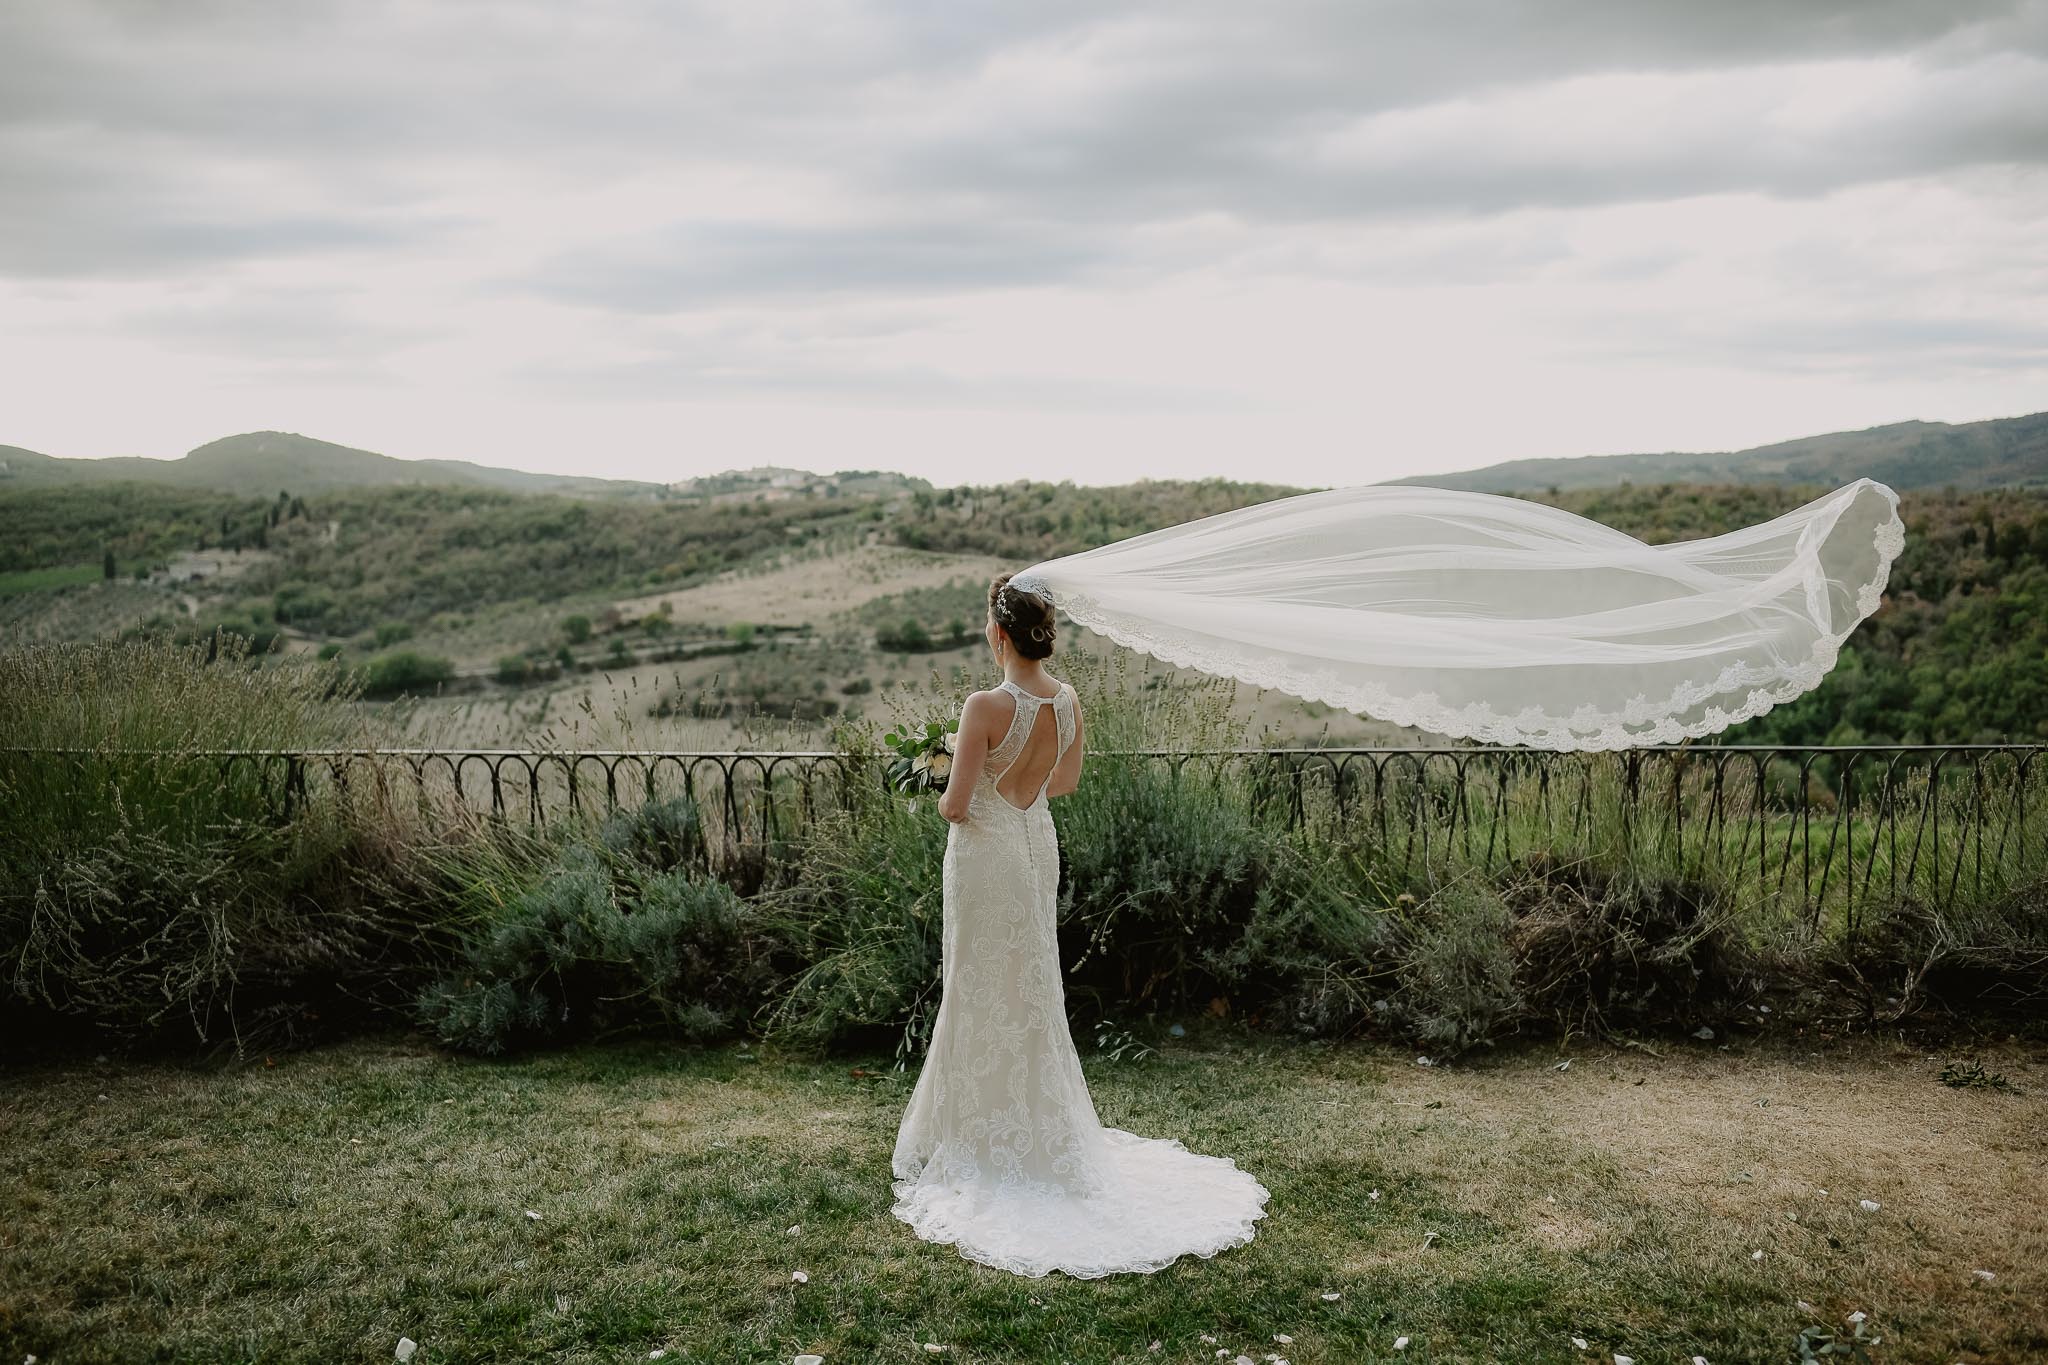 D850-field-test-real-world-review-wedding-6